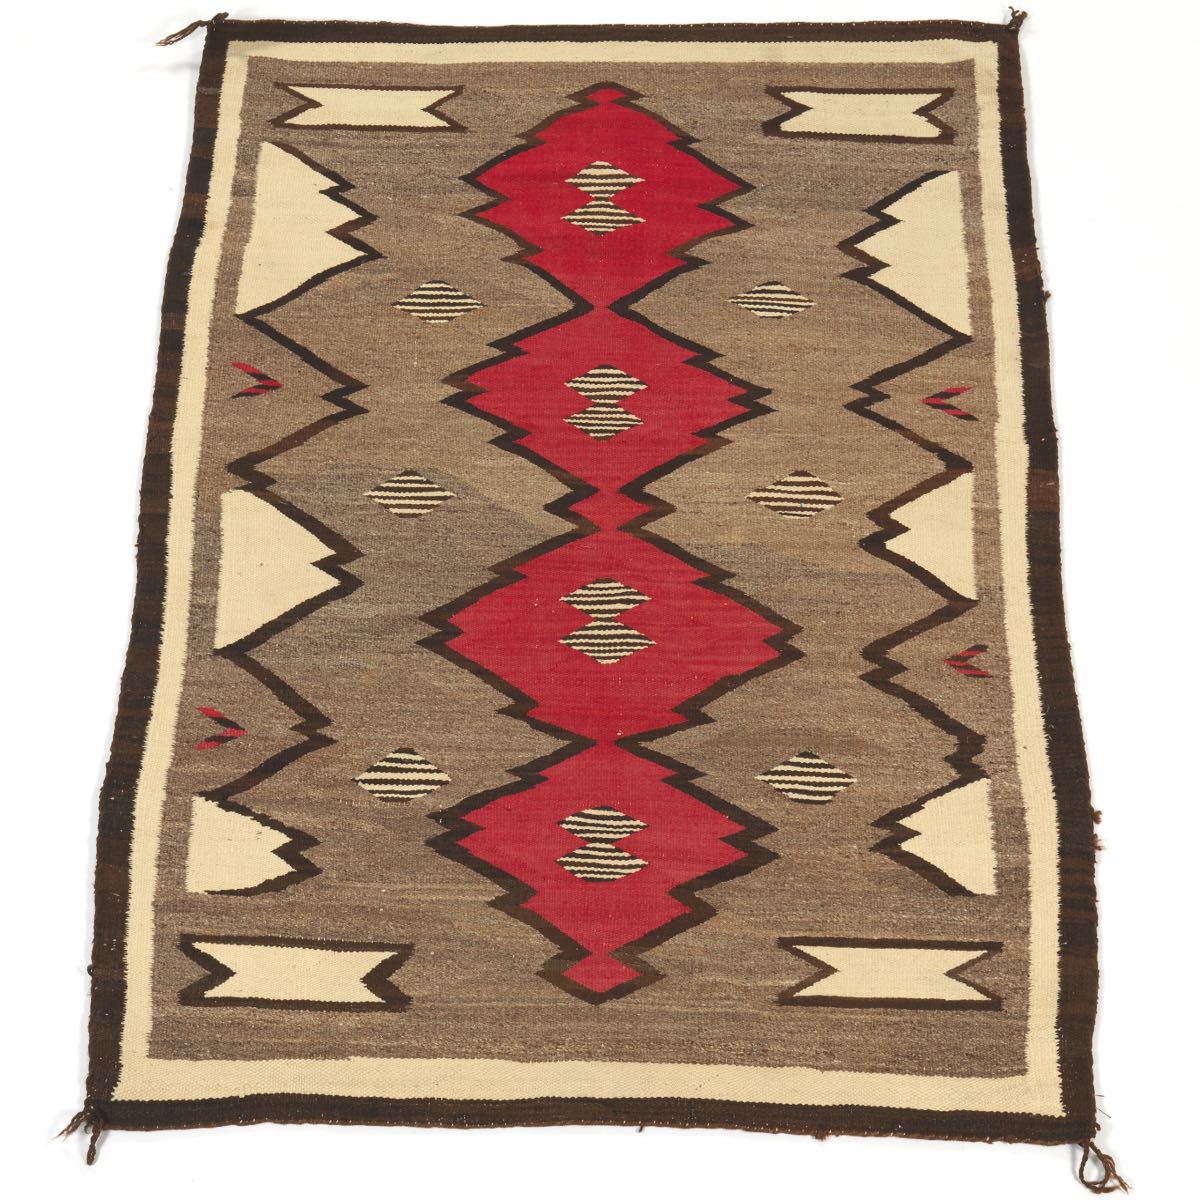 Navajo Blanket, ca. 1900-1940's 5'1/2" x 3'7-1/2"Homespun wool blanket, very soft with lazy lines